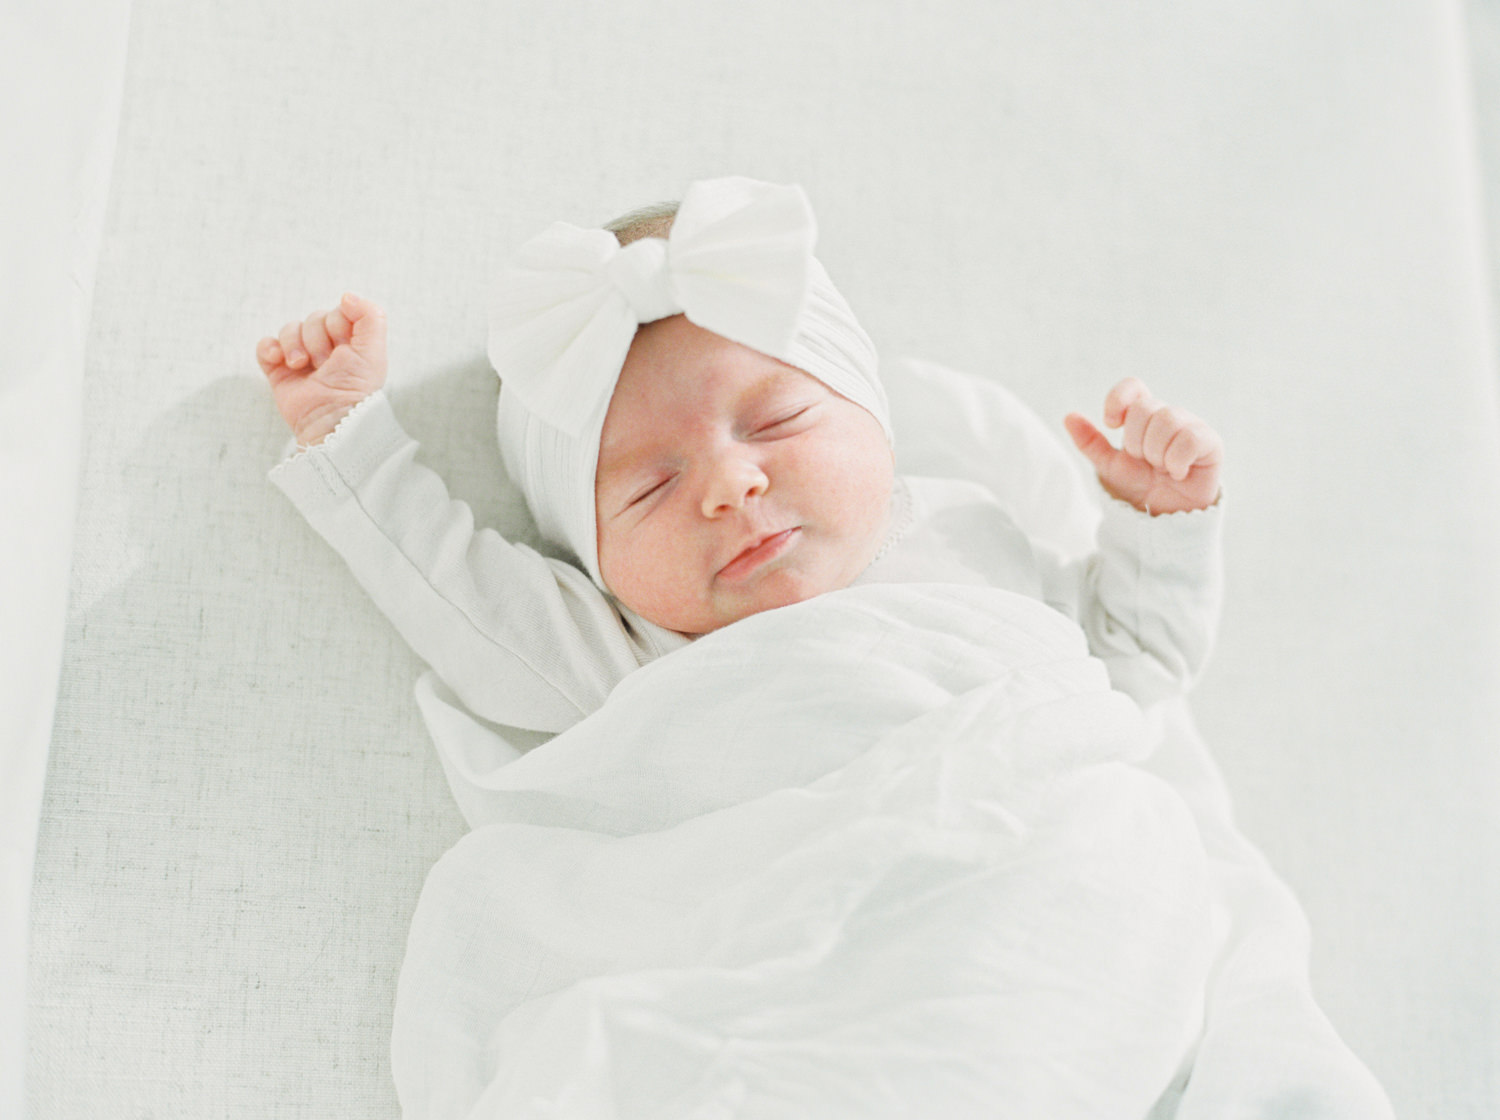 sleeping baby in white clothes and white blanket sleeping on a cream color couch and stretching